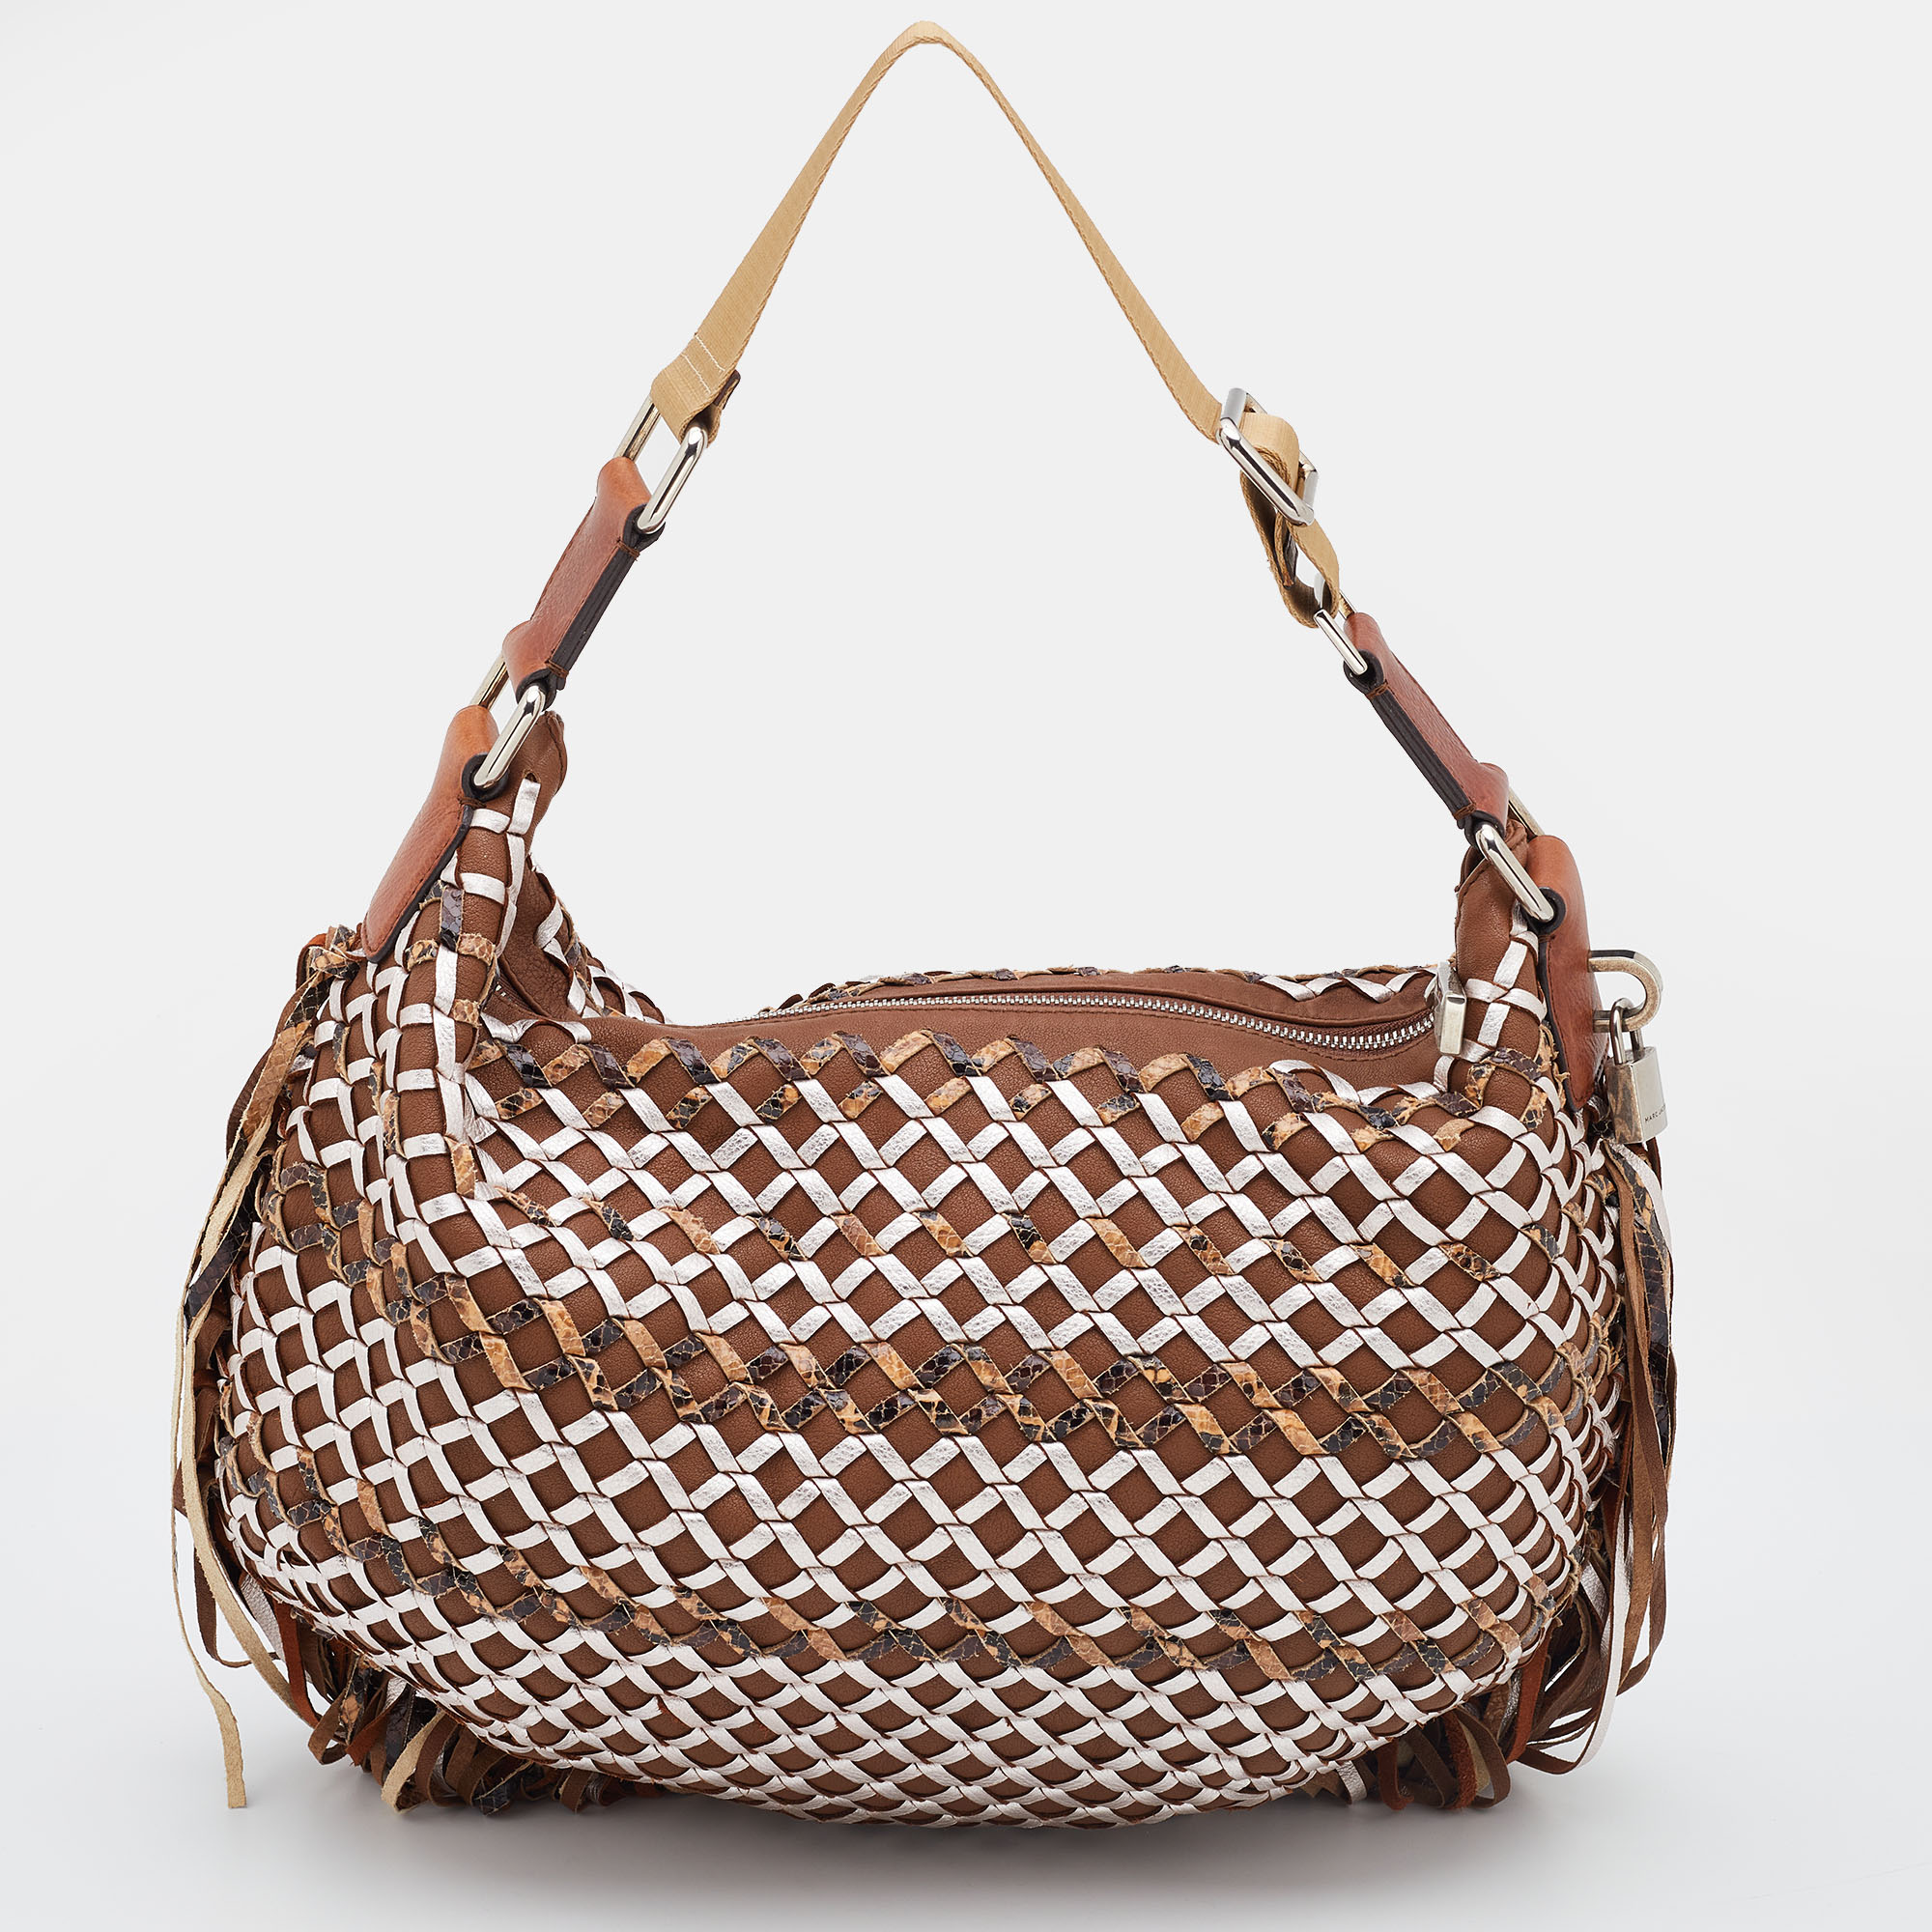 Marc Jacobs Brown/Metallic Woven Leather And Snakeskin Embossed Leather Fringe Hobo